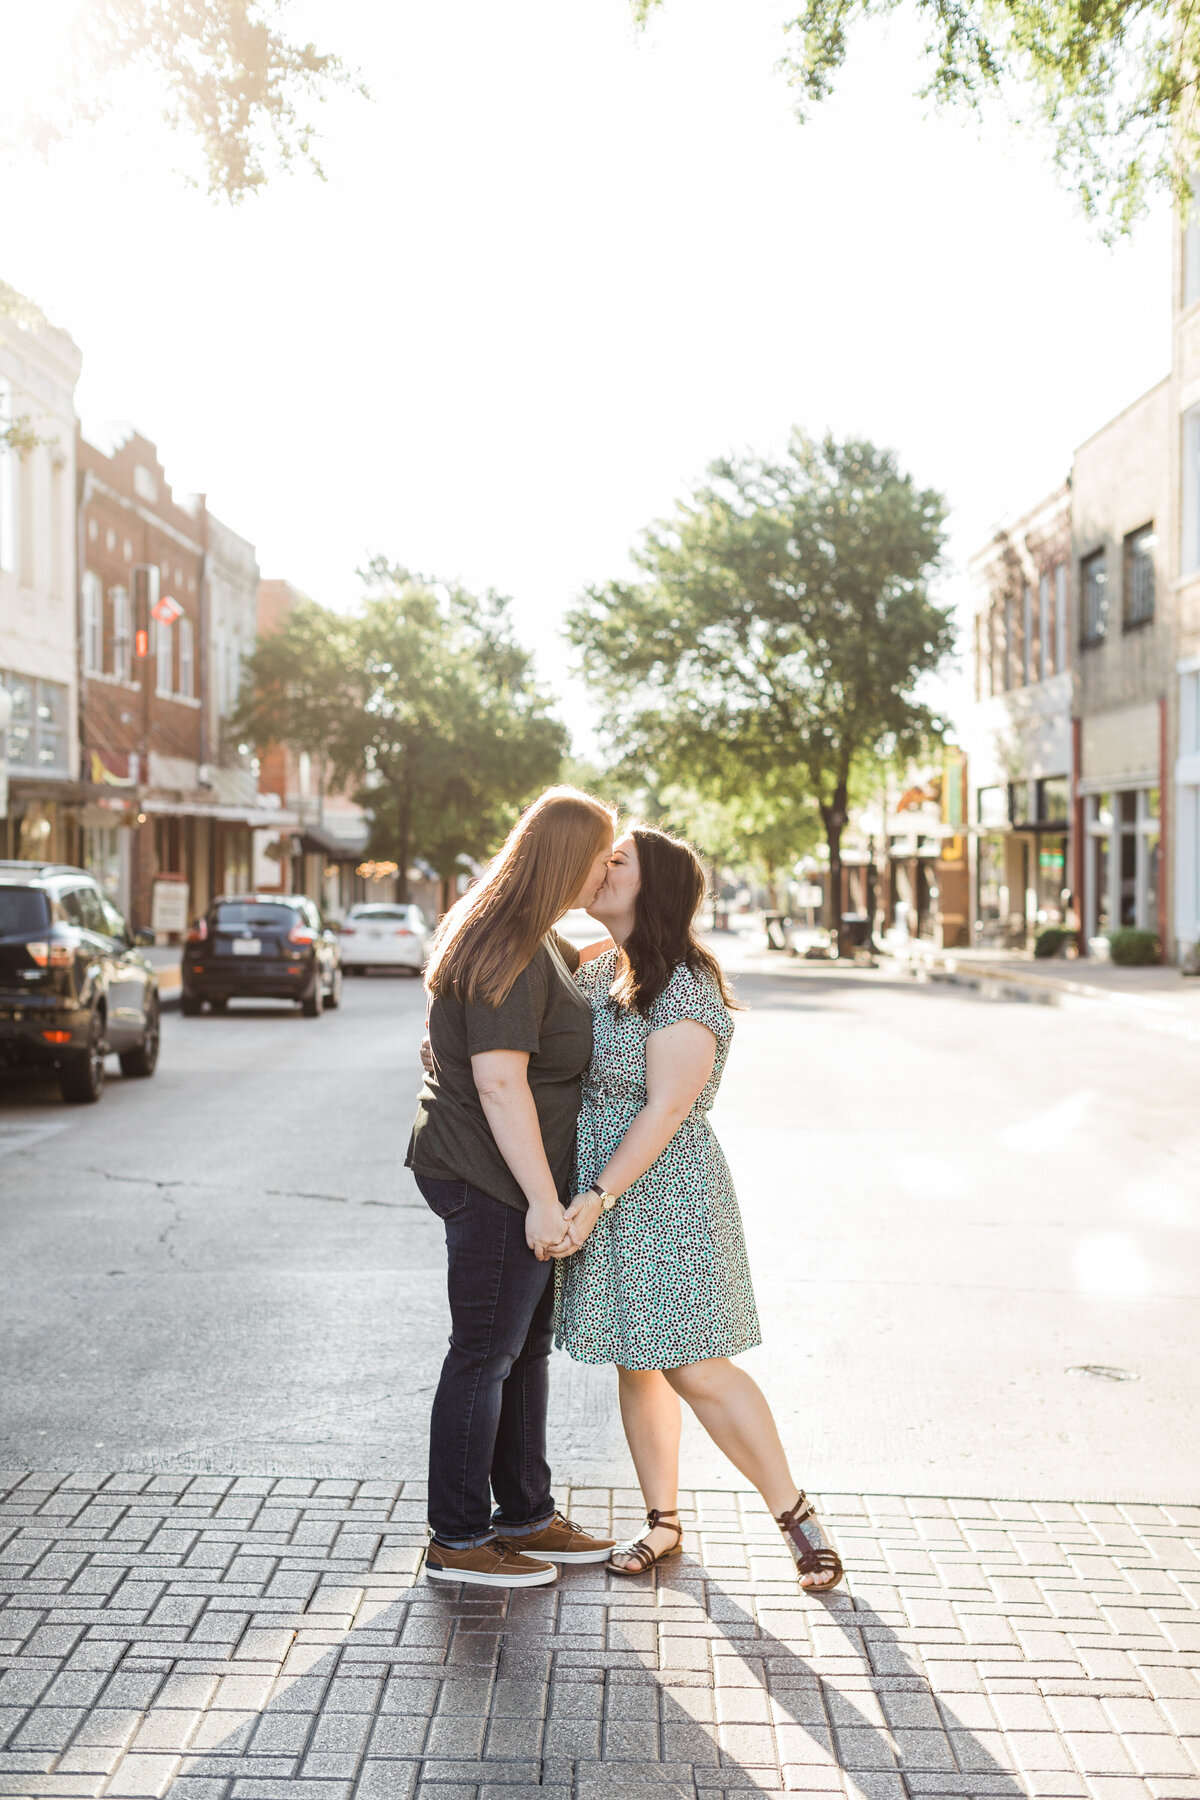 A lesbian couple sharing a kiss during their outdoor engagement session in downtown McKinney, Texas. The woman on the right is wearing a short colorful dress while the woman on the left is wearing a dark t-shirt and dark jeans.